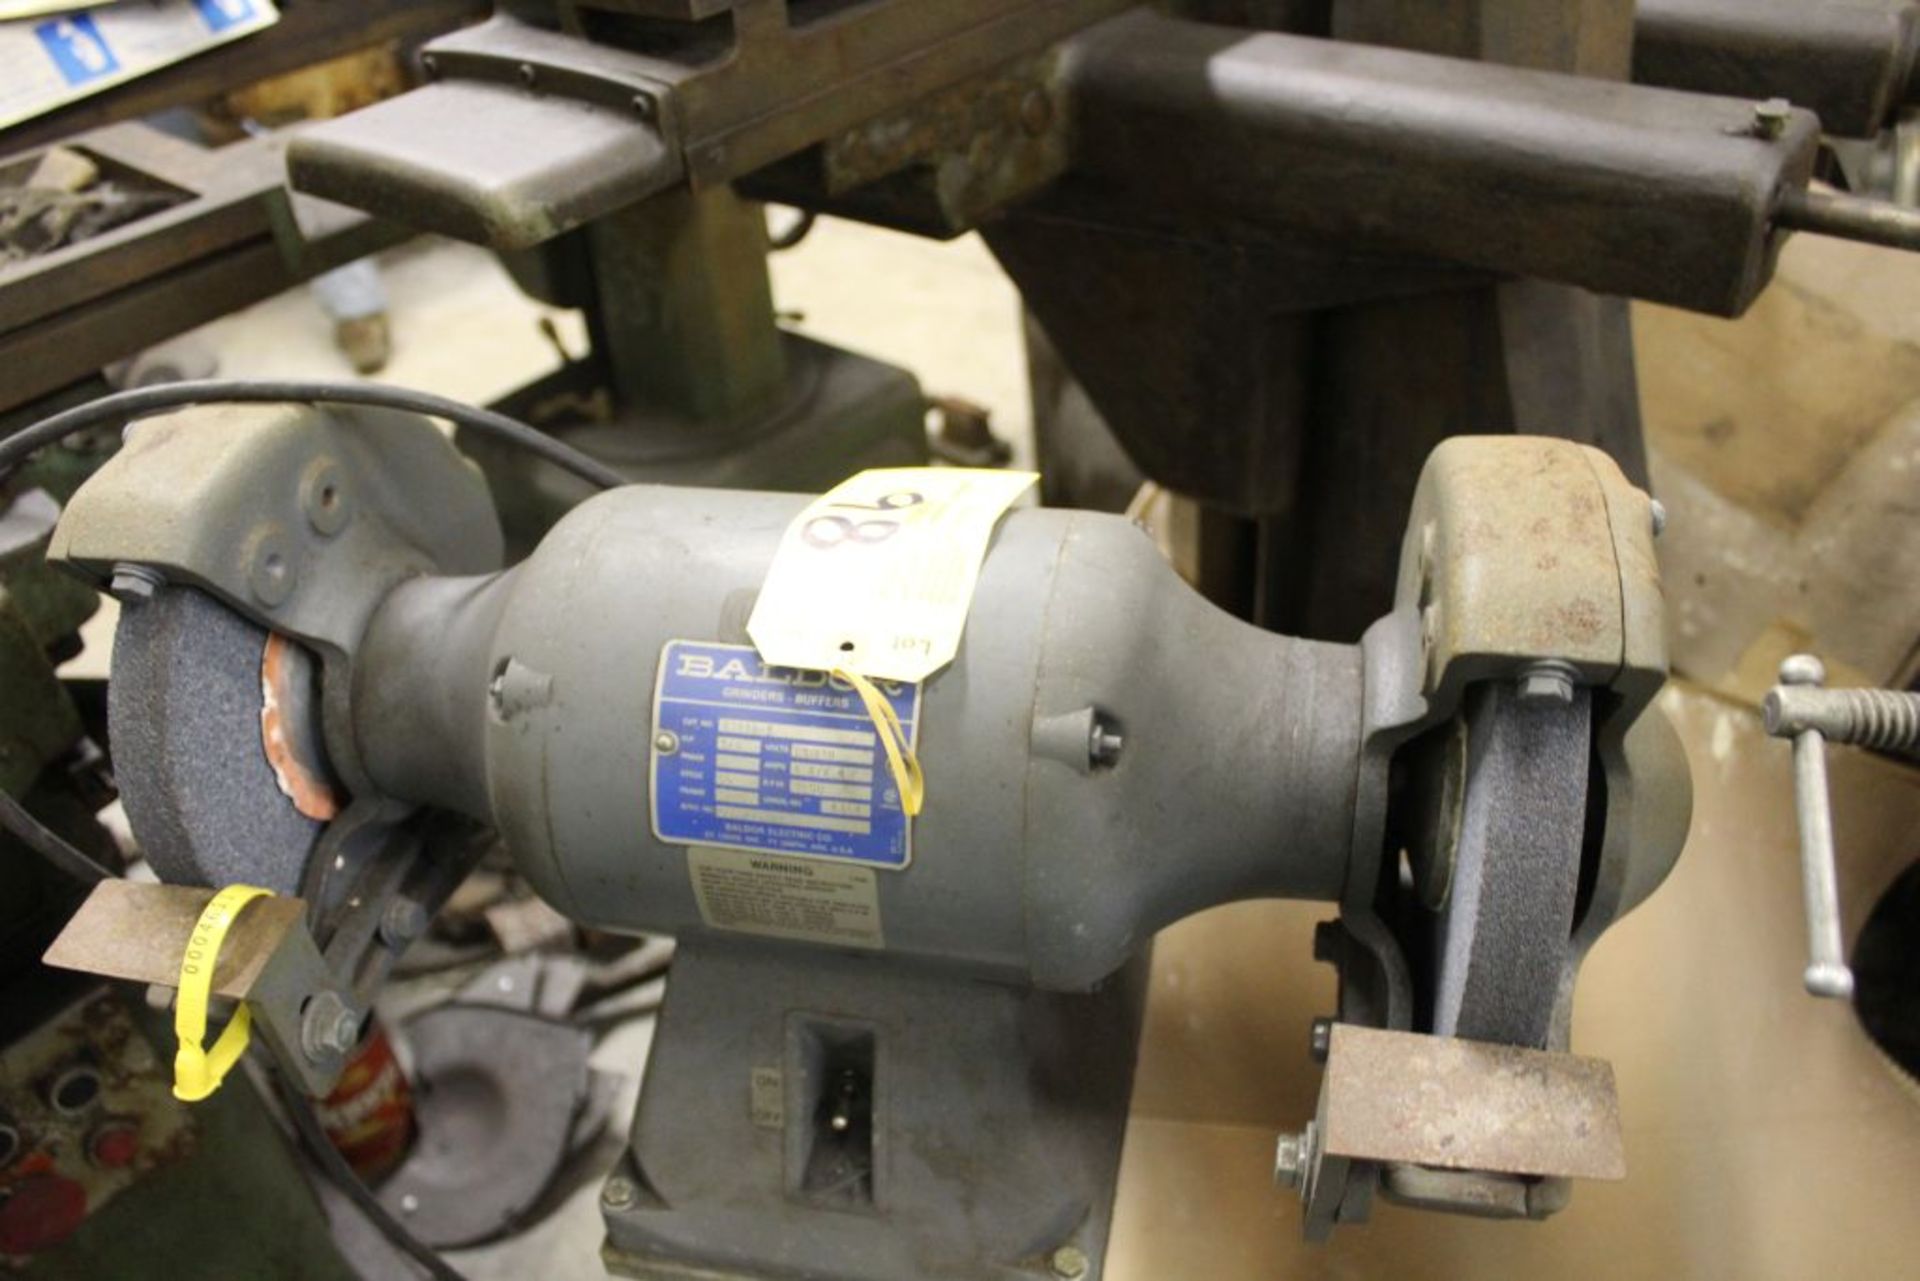 Baldor double spindle grinder, 8", 3/4 hp., on stand.